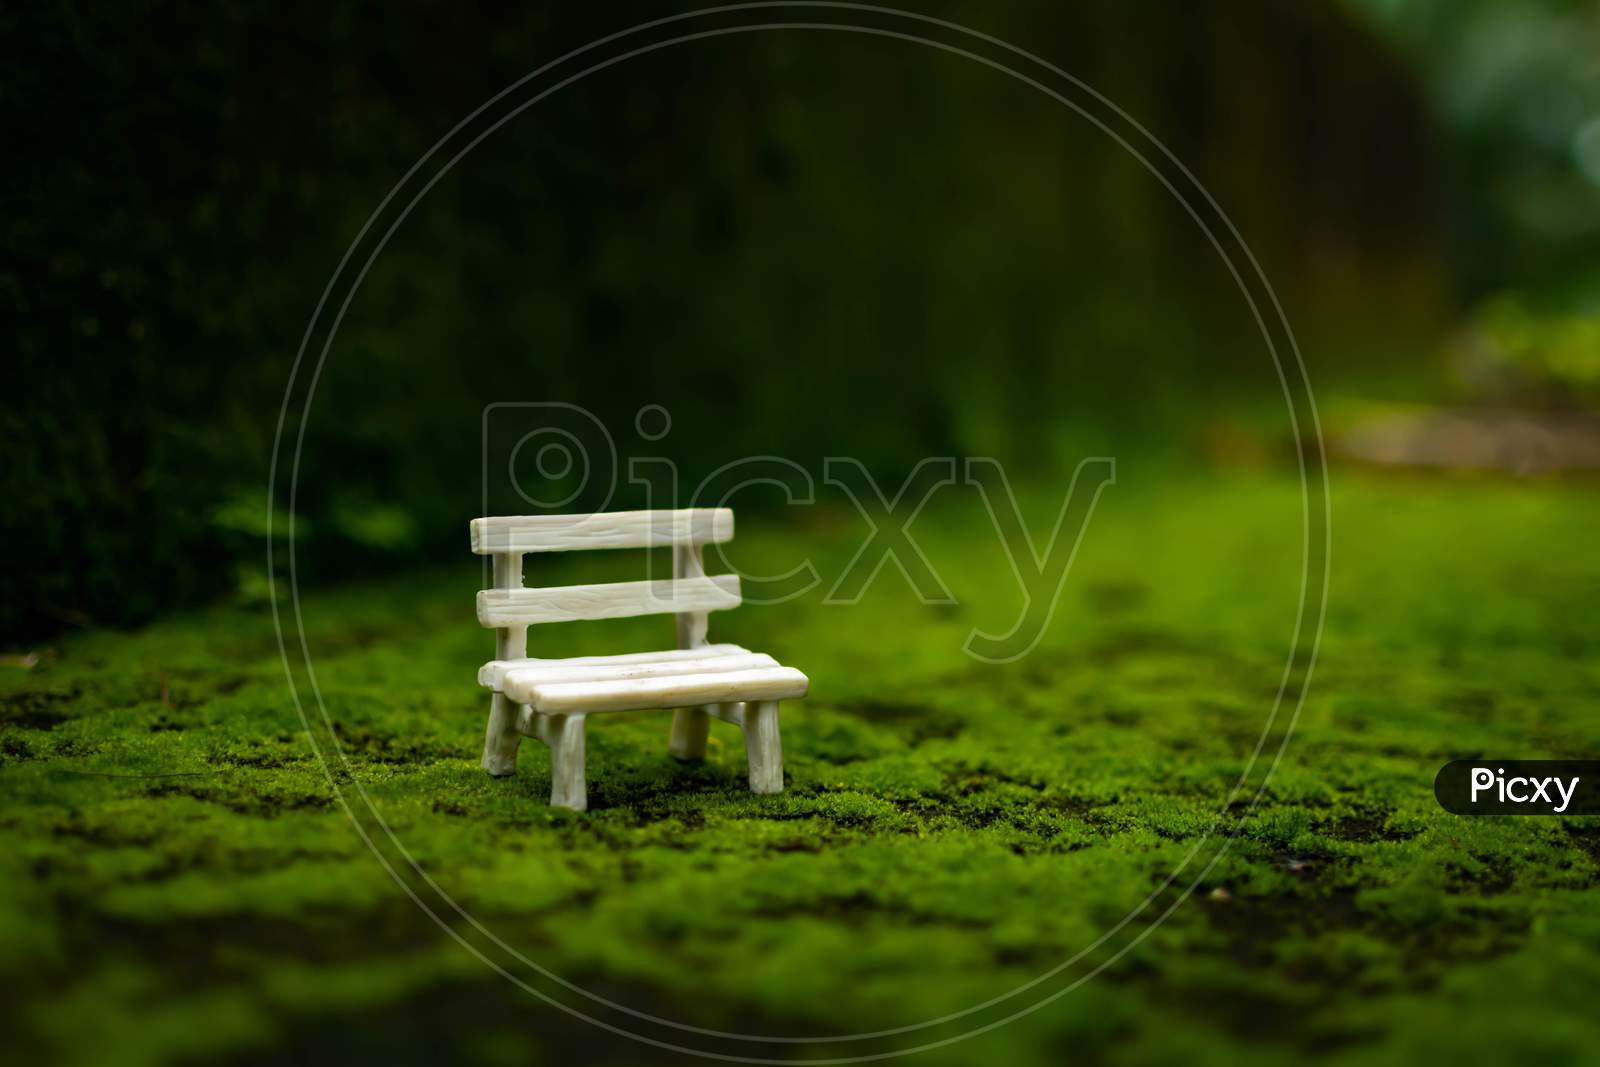 A Toy Park Chair In A Green Grass Surface With Beautiful Blurry Background